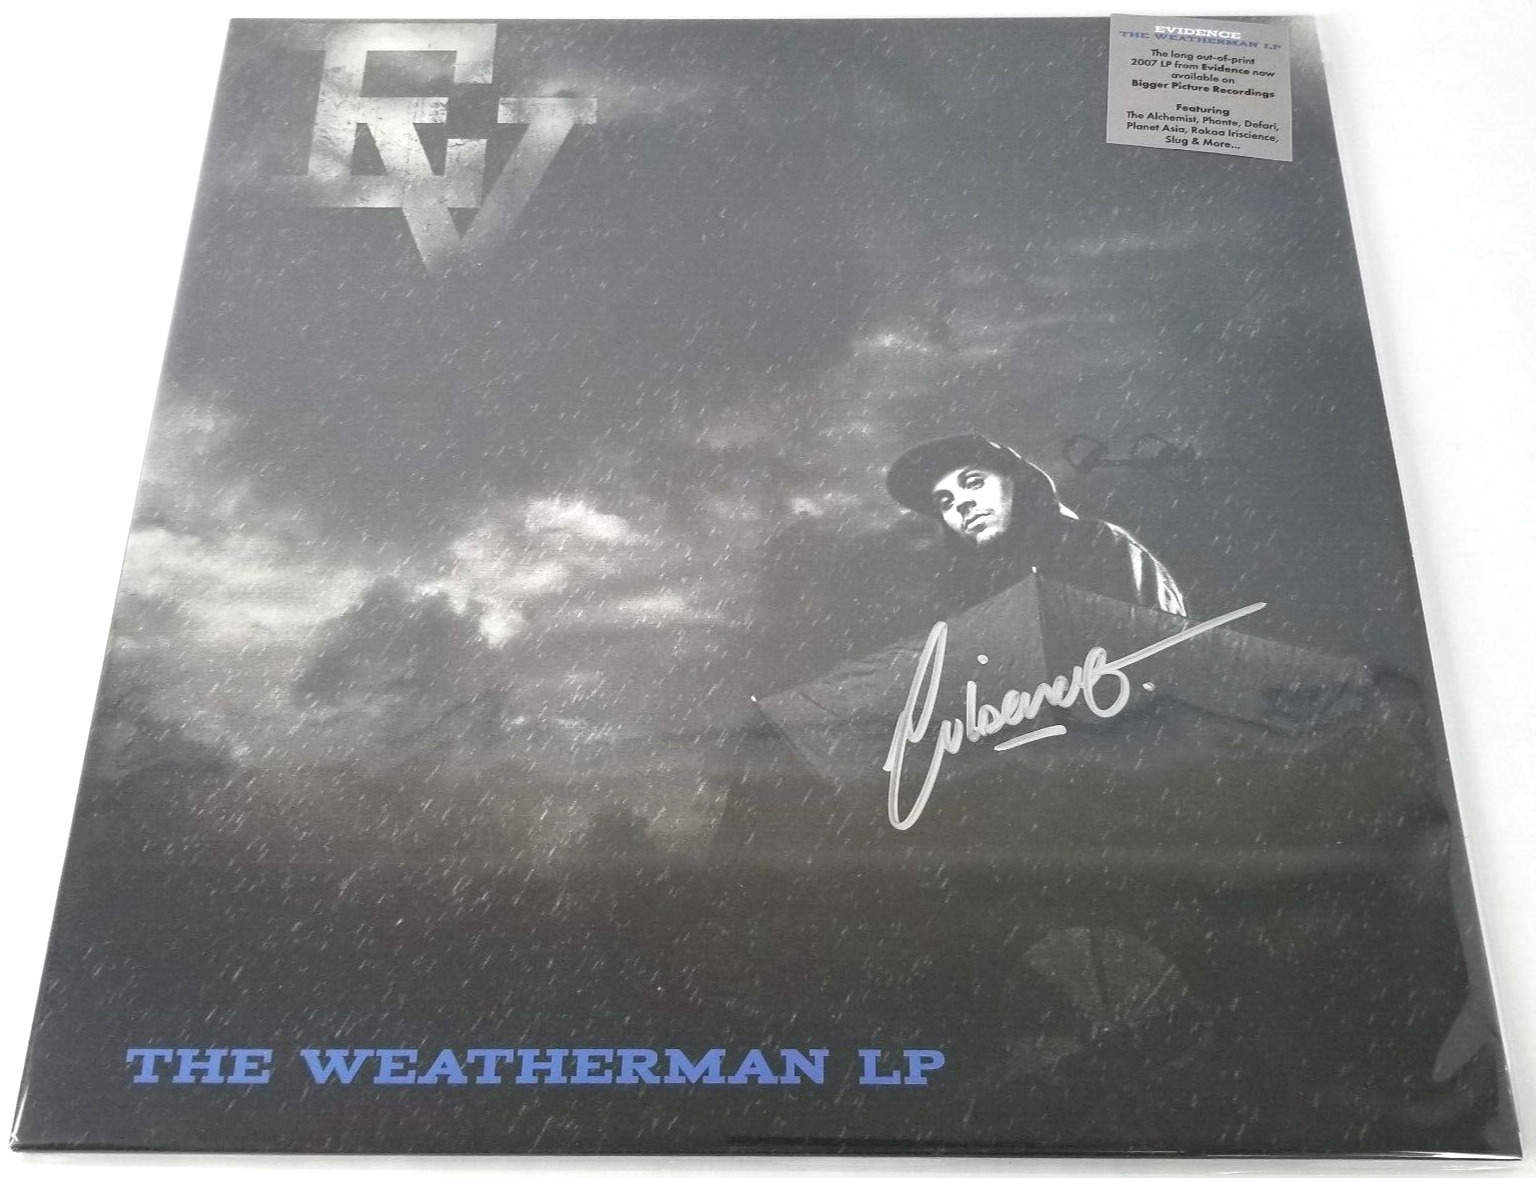 Evidence The Weatherman LP White Vinyl Signed by Evidence 2xLP Brand New Sealed